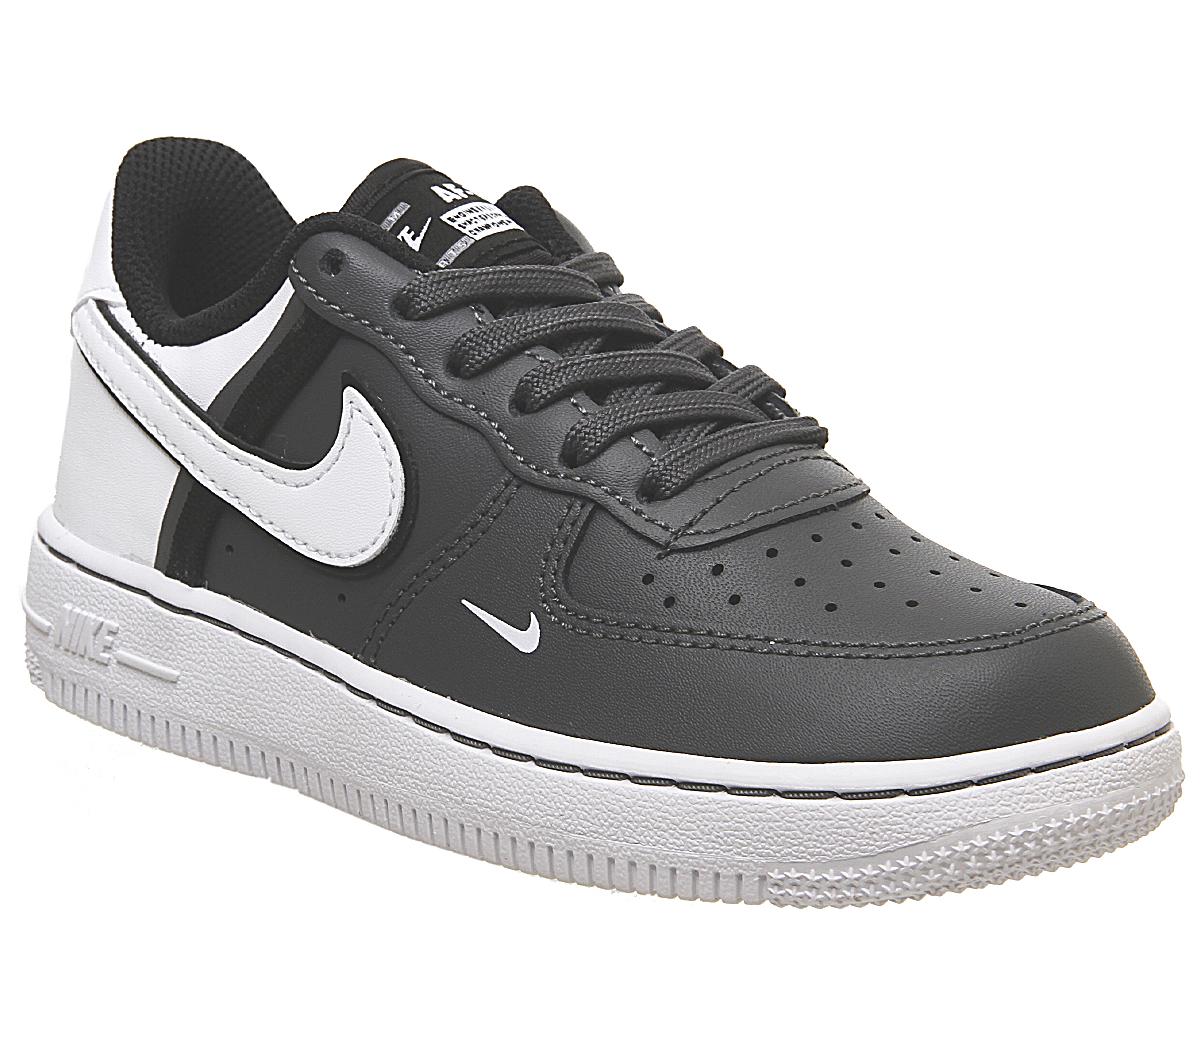 air force 1 lv8 white and grey